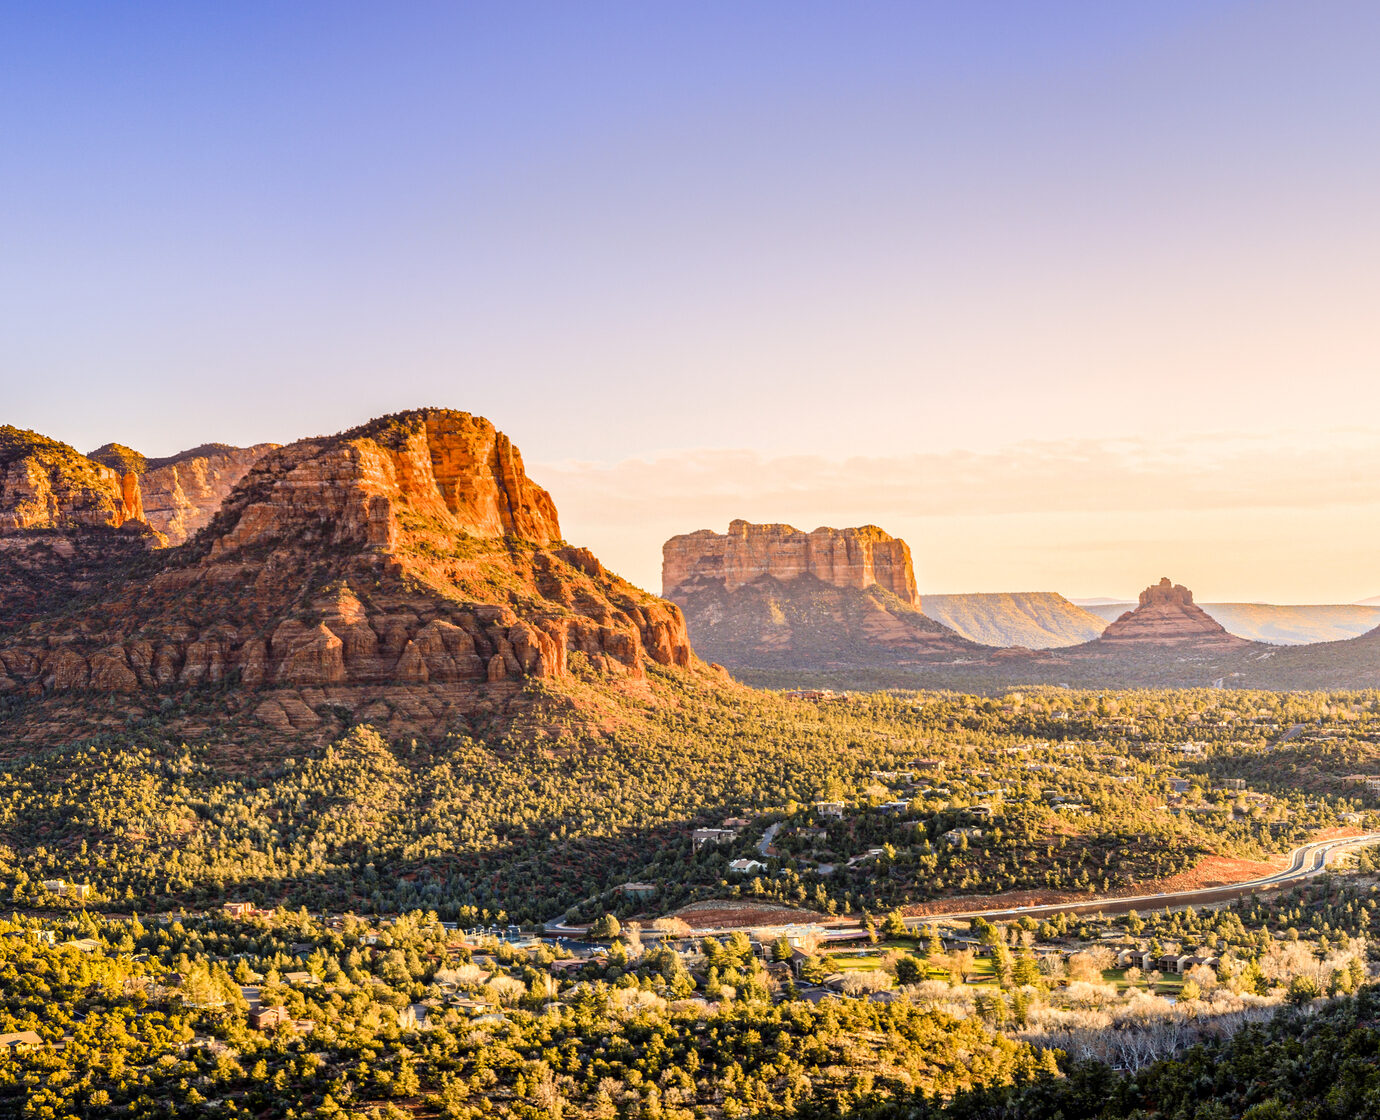 Scenic view to Courthouse Butte, Bell Rock and surrounding red rocks formations in Sedona, Arizona at sunset